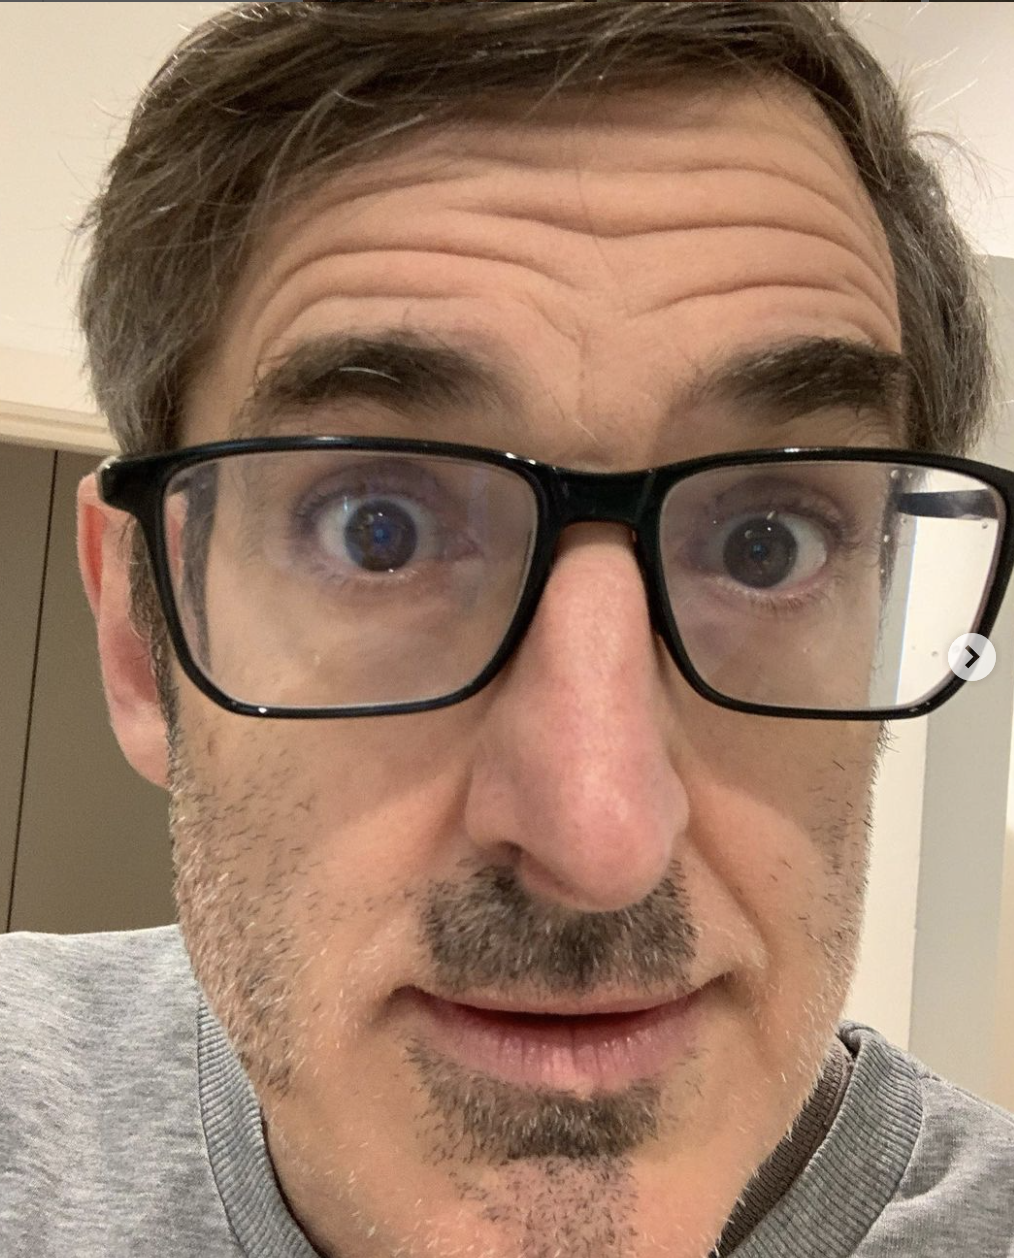 Louis Theroux showing his beard loss on 10 January. Credit: Instagram, @officiallouistheroux